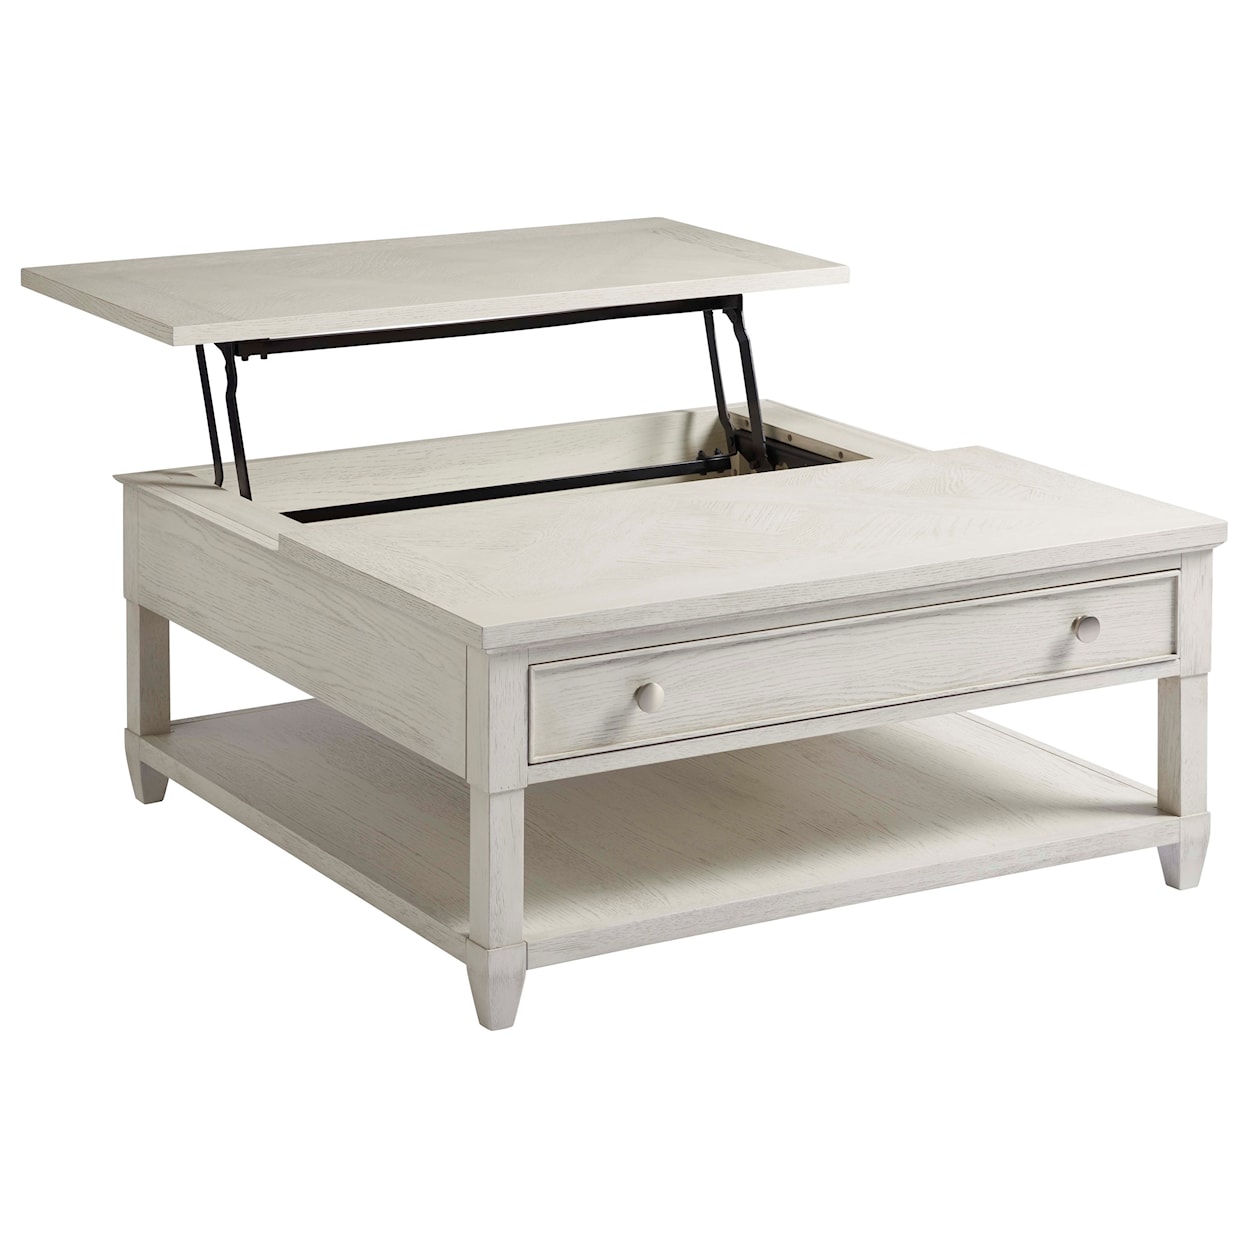 Universal Escape-Coastal Living Home Collection Topsail Lifttop Table